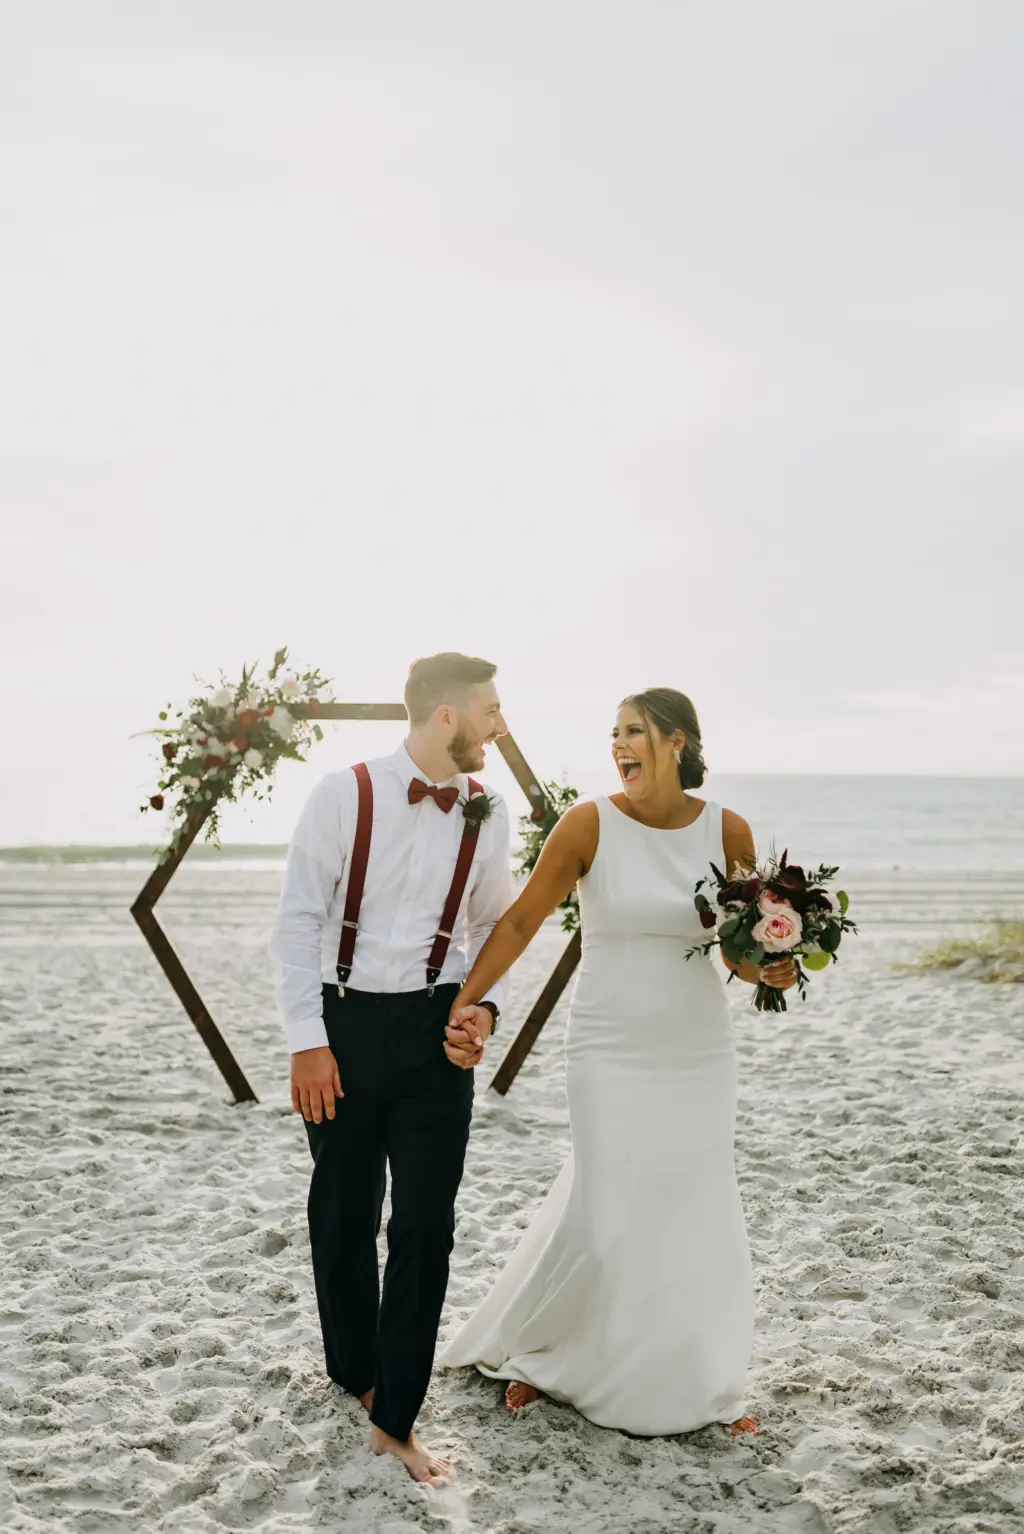 Bride and Groom Just Married Wedding Portrait | Tampa Bay Planner Elope Tampa Bay | Photographer Amber McWhorter Photography